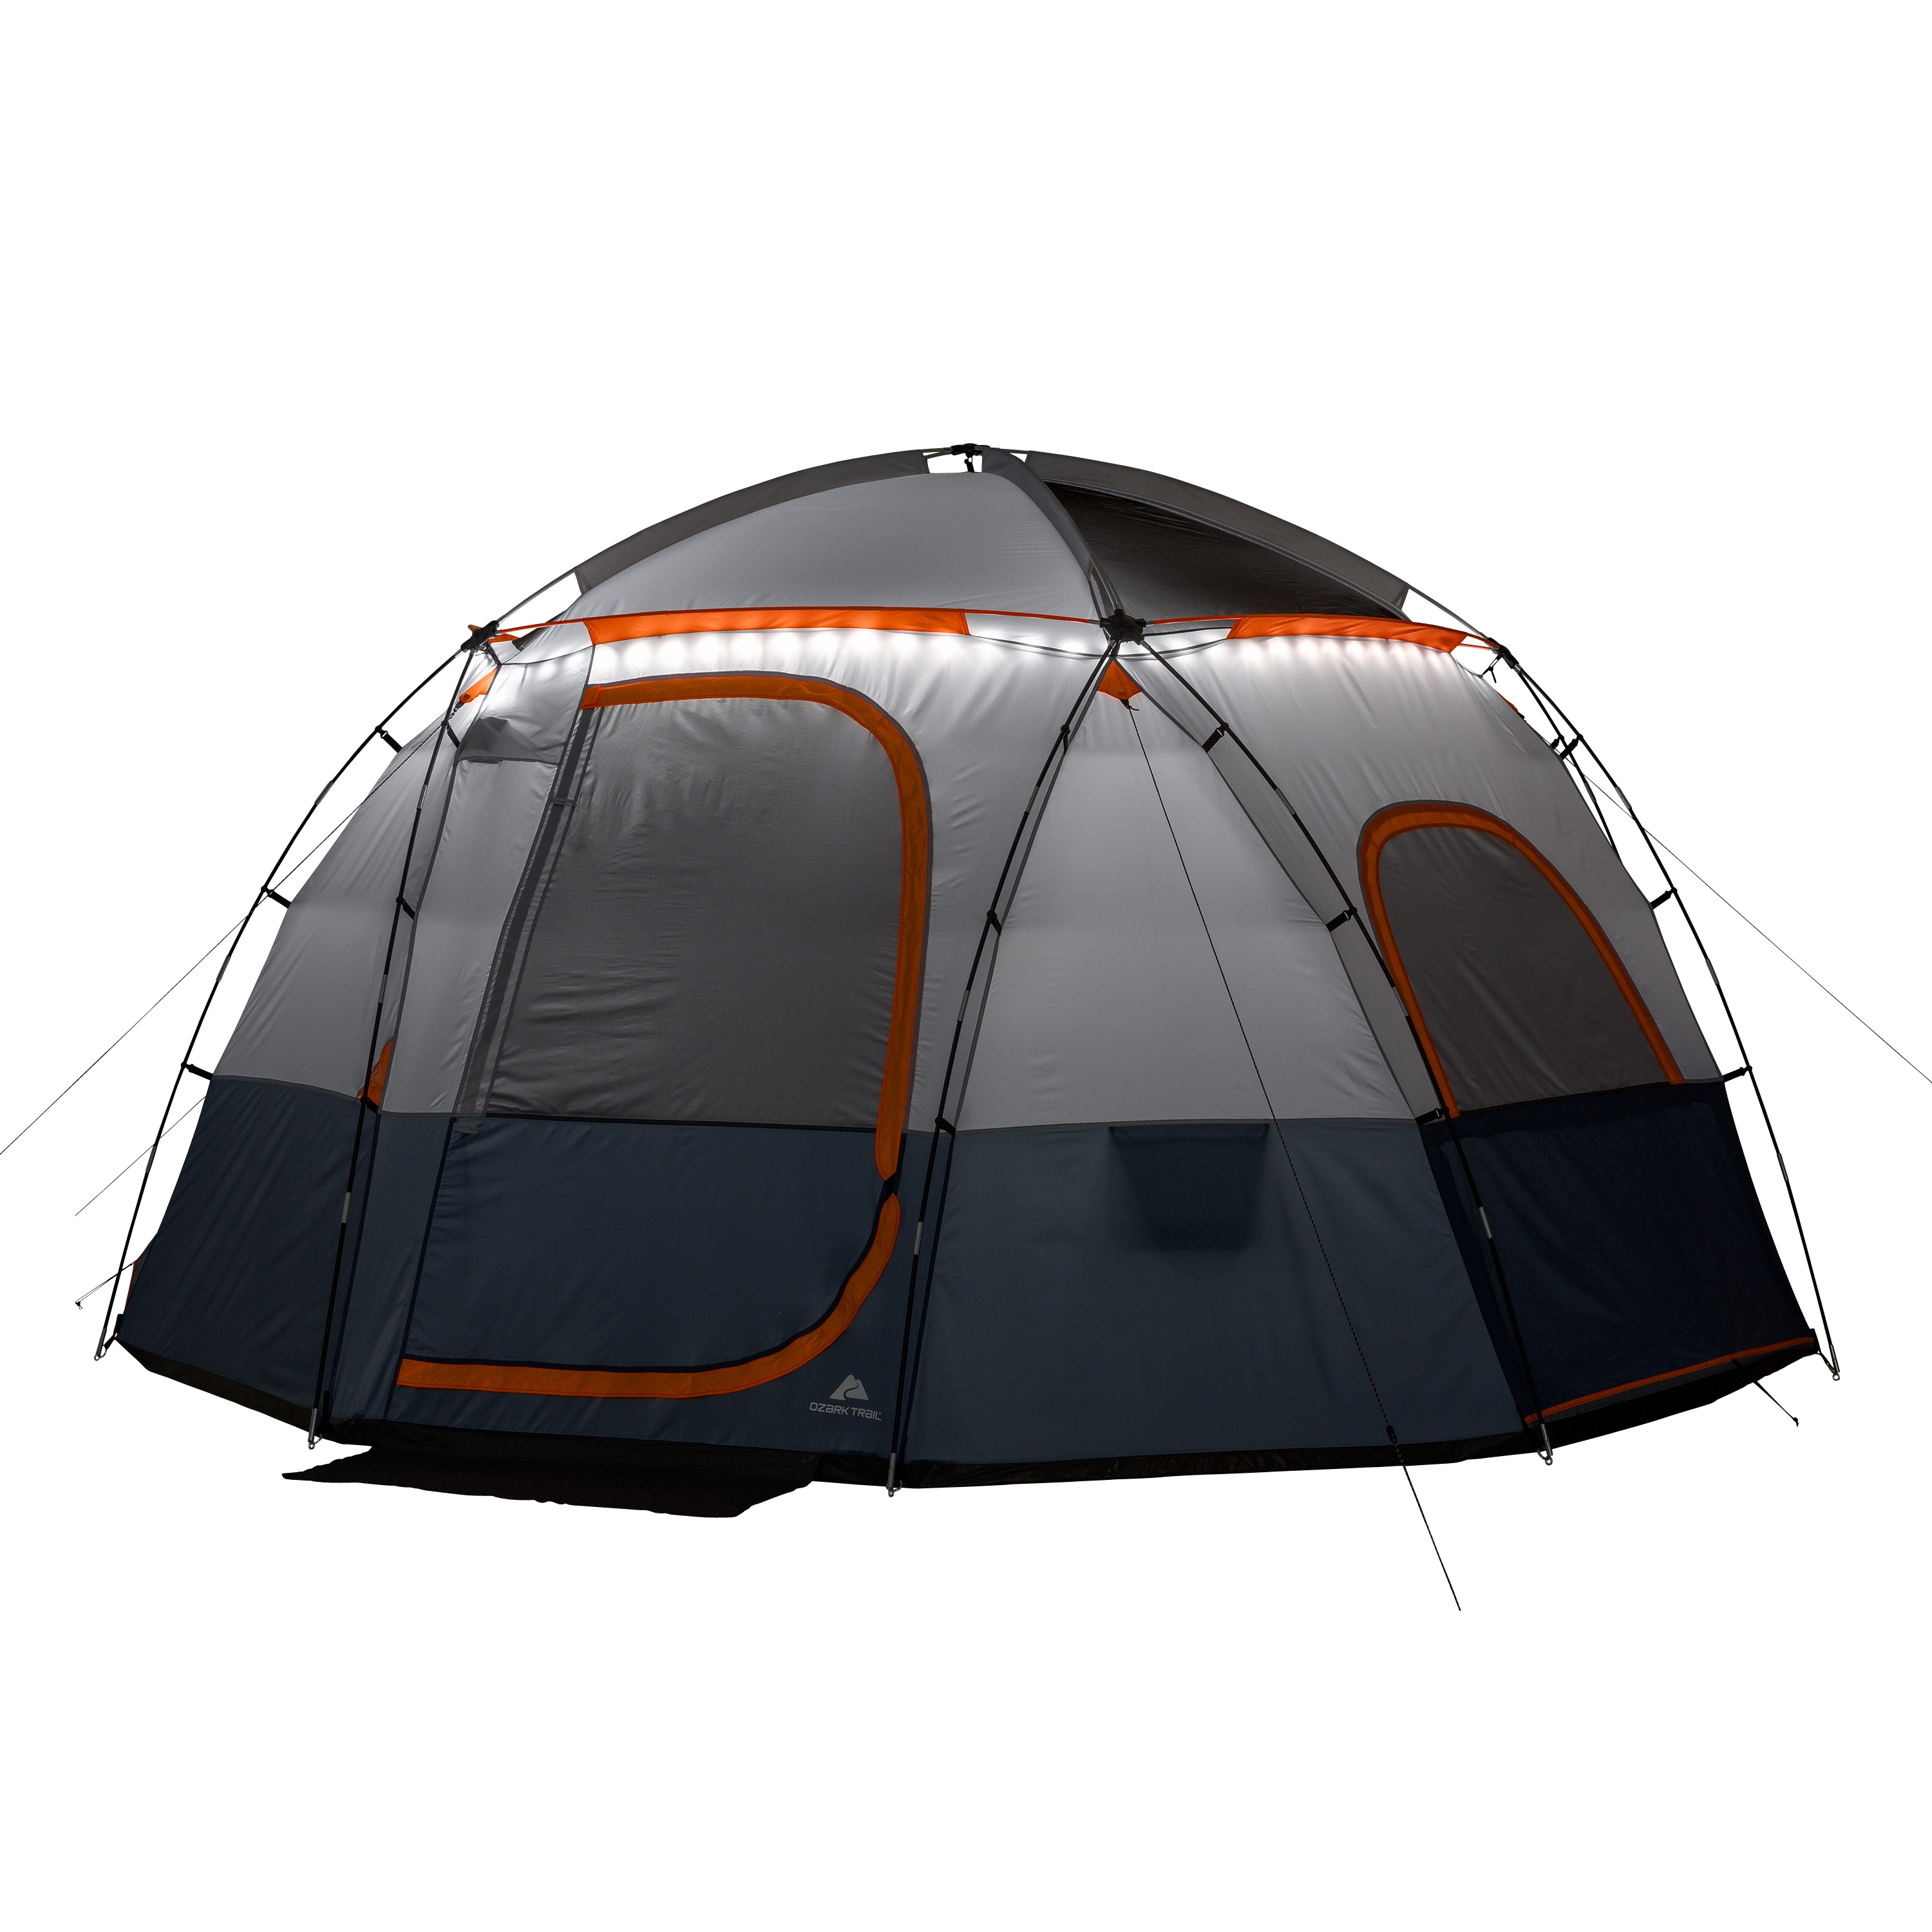 Ozark Trail 15’ x 15’ 9-Person Lighted Sphere Tent, 30.97 lbs - image 3 of 8